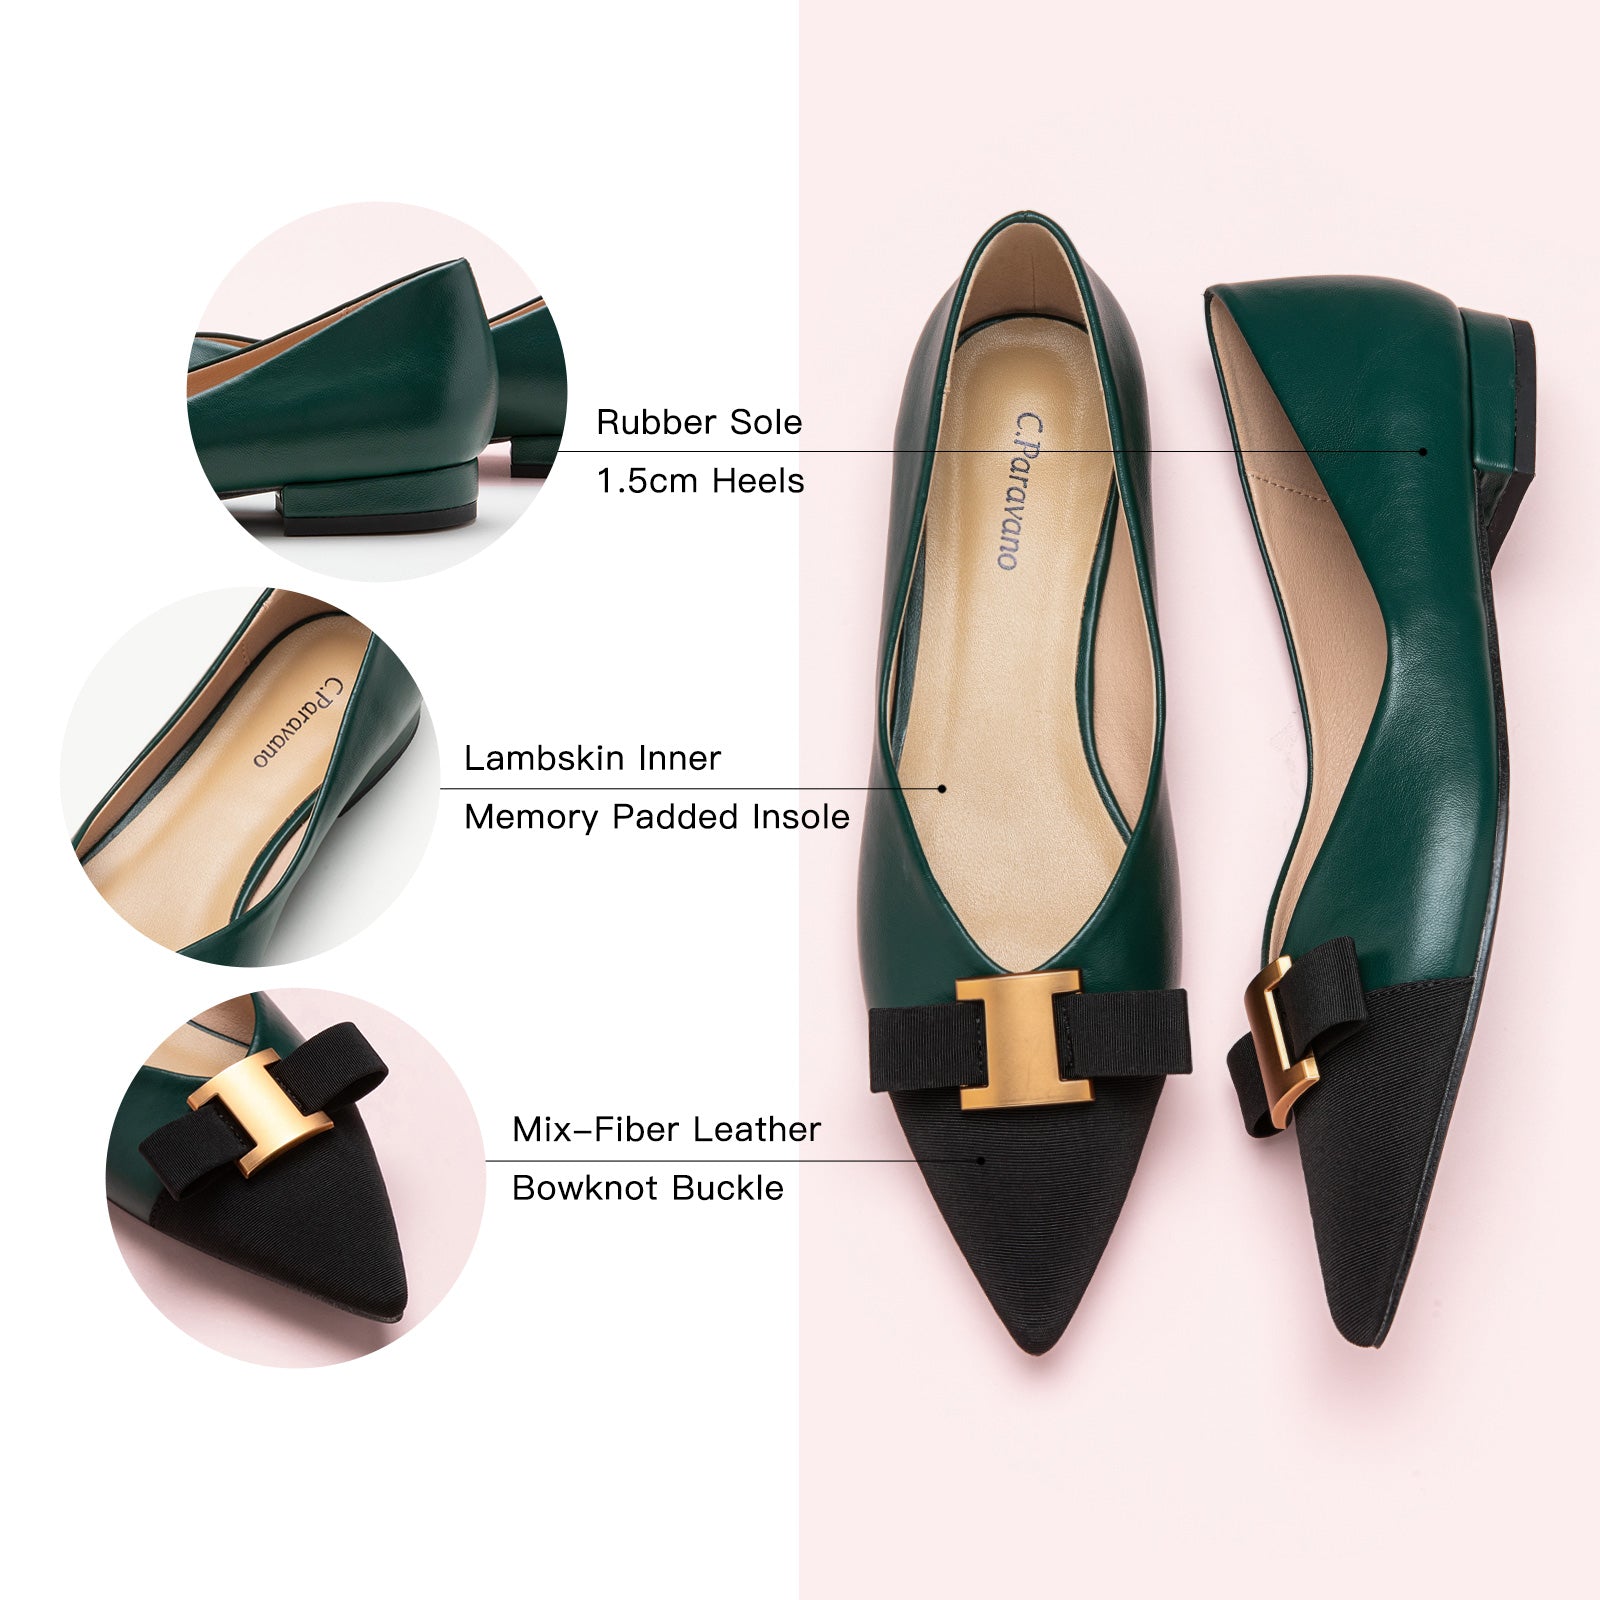 Green Envy: Dark Green Leather Flats with embellishments, a unique and eye-catching addition to your footwear collection.